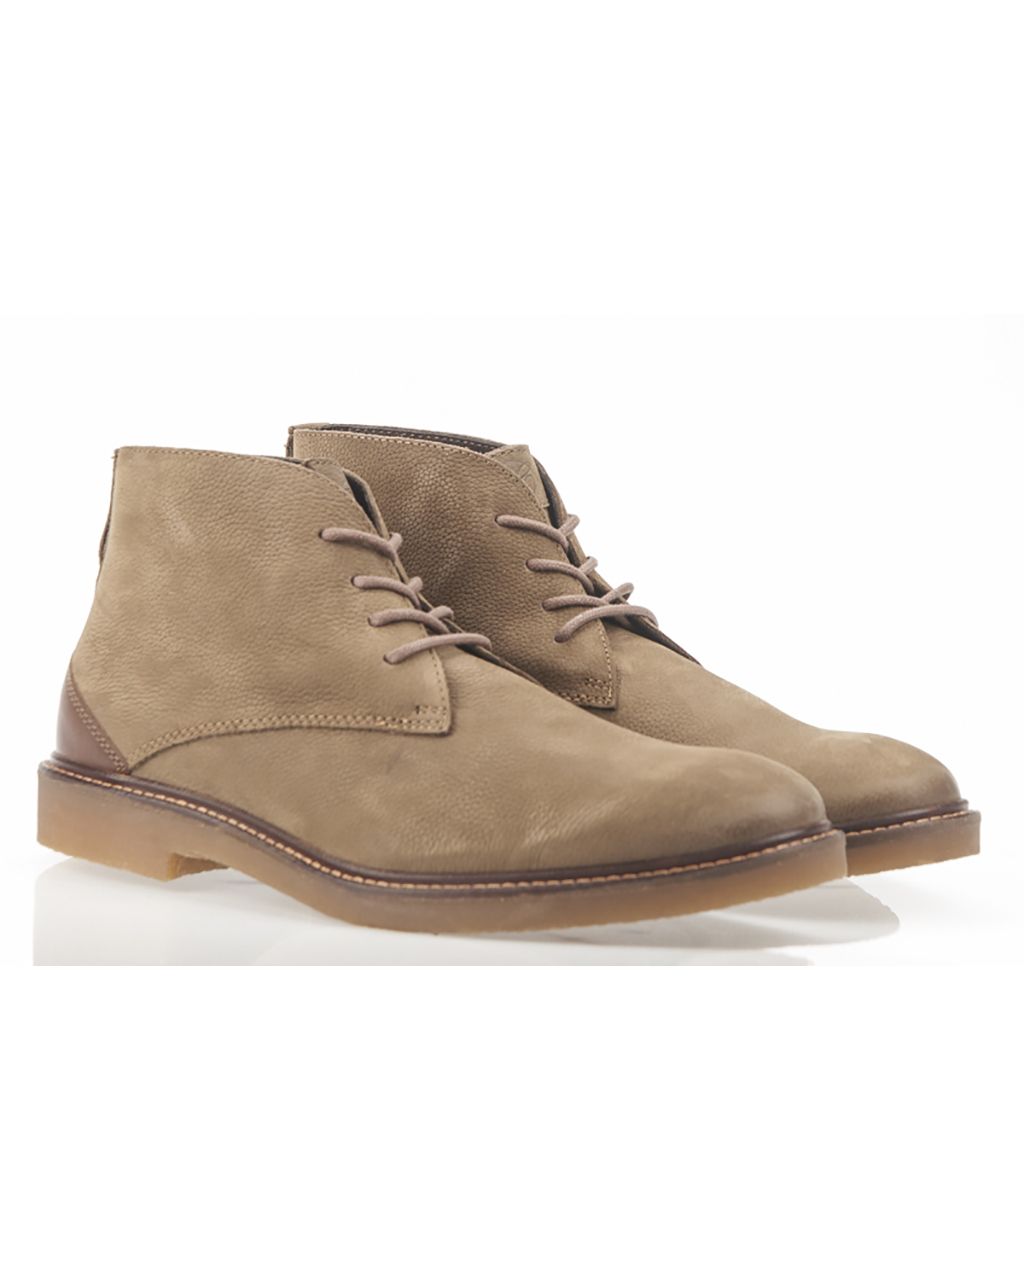 Campbell Classic Casual Boots Lichtbruin uni 070110-003-40